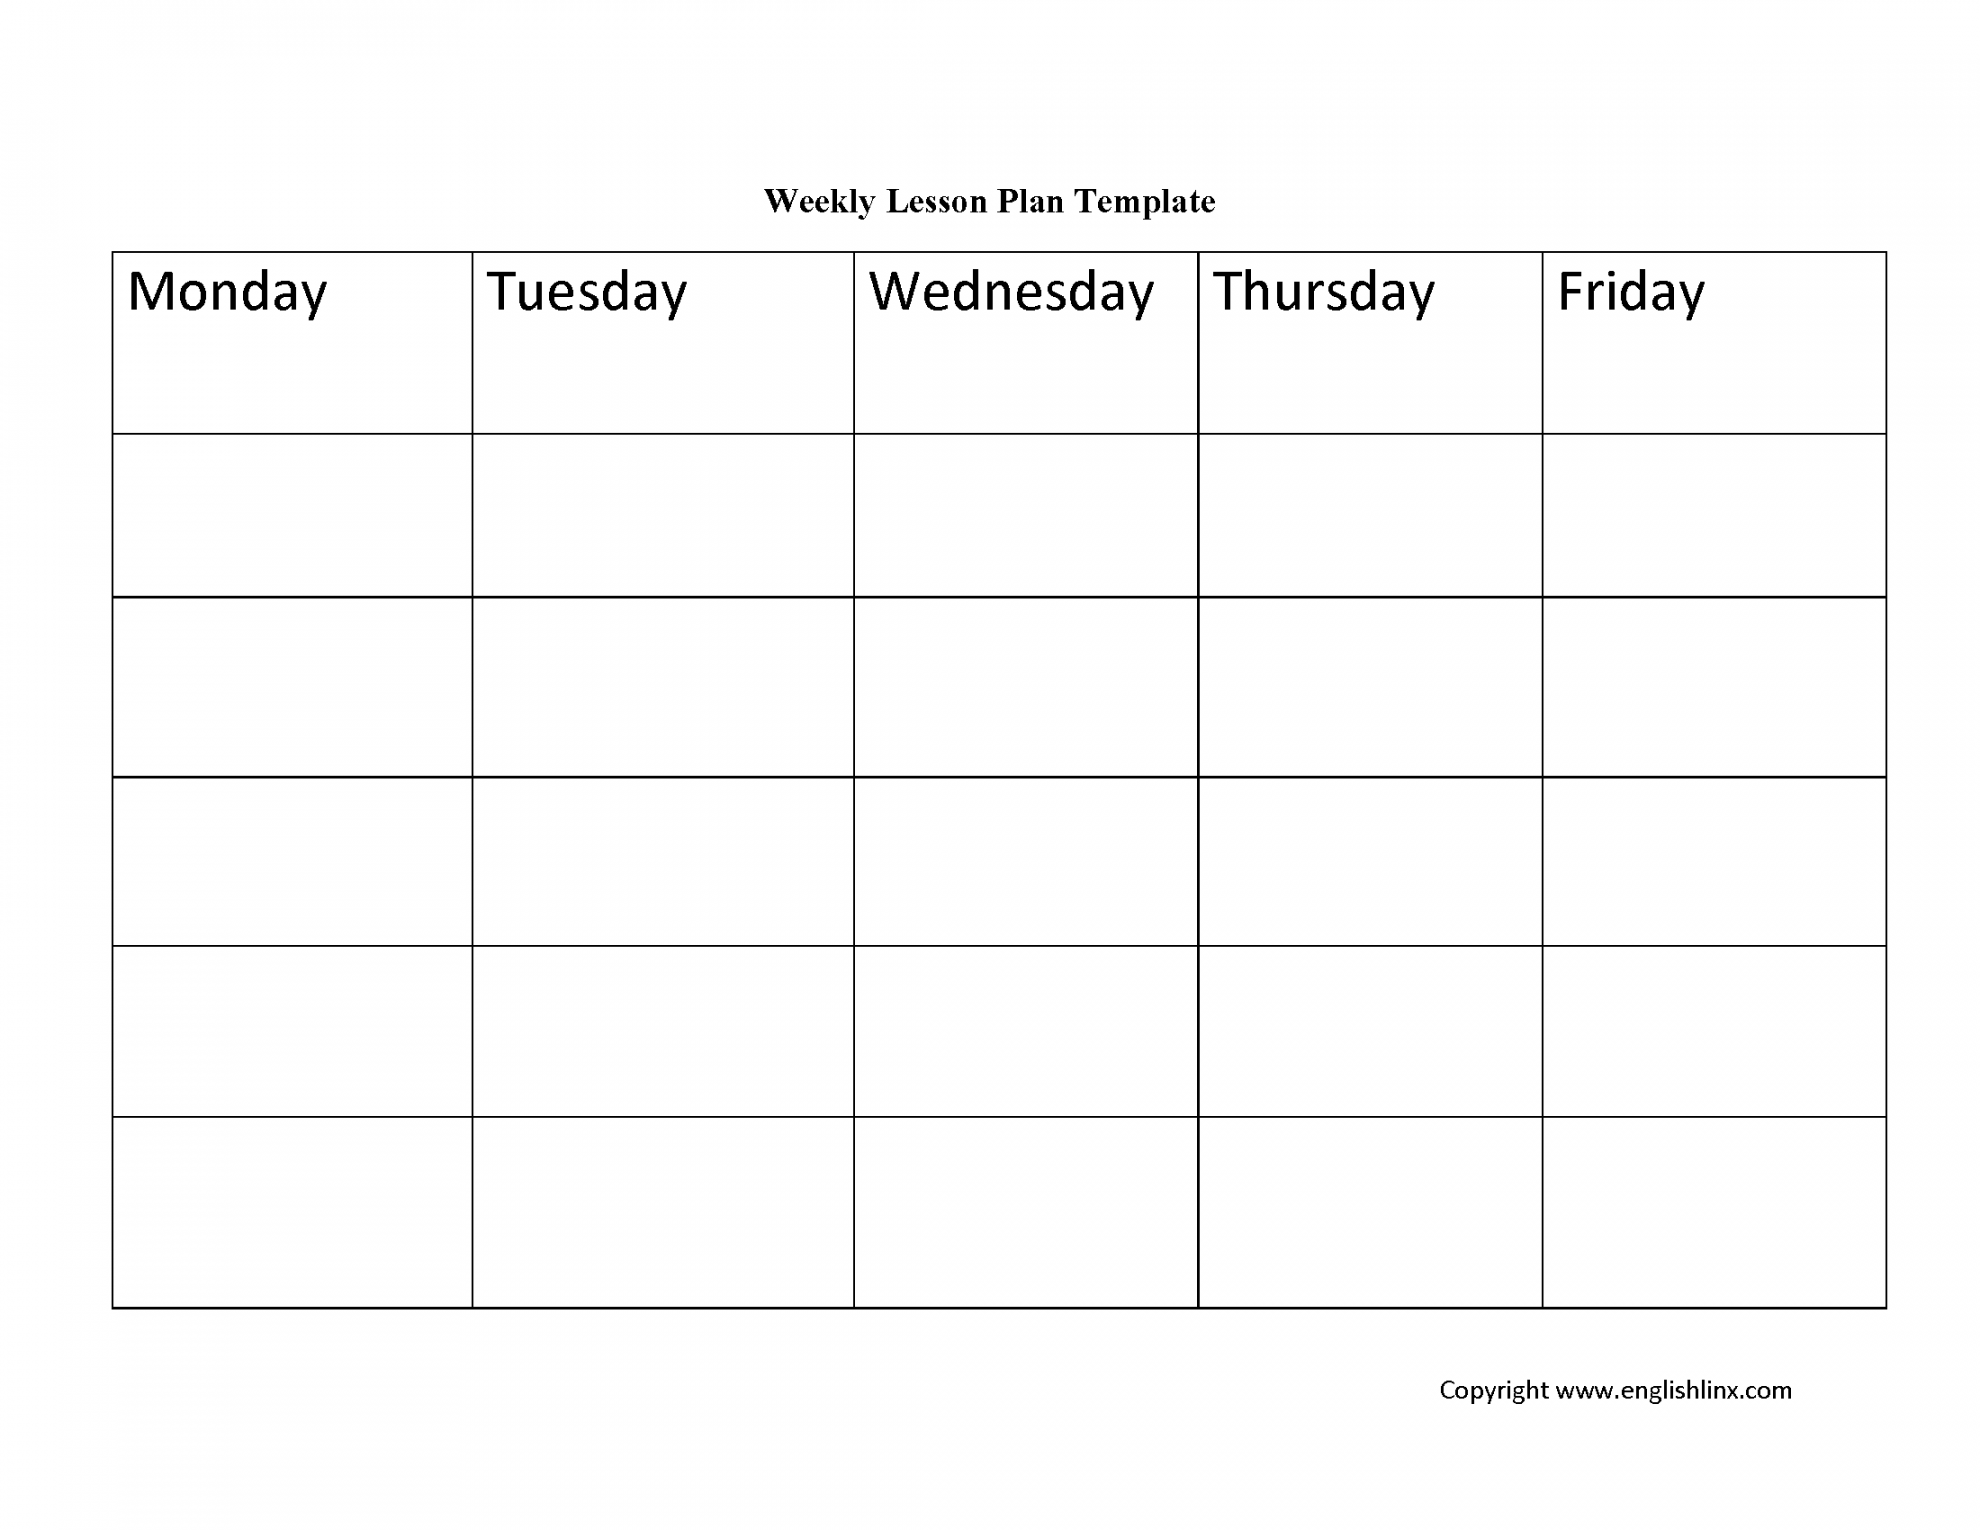 Lesson Plan Template  Weekly Lesson Plan Template - FREE Printables - Printable Free Weekly Lesson Plan Template